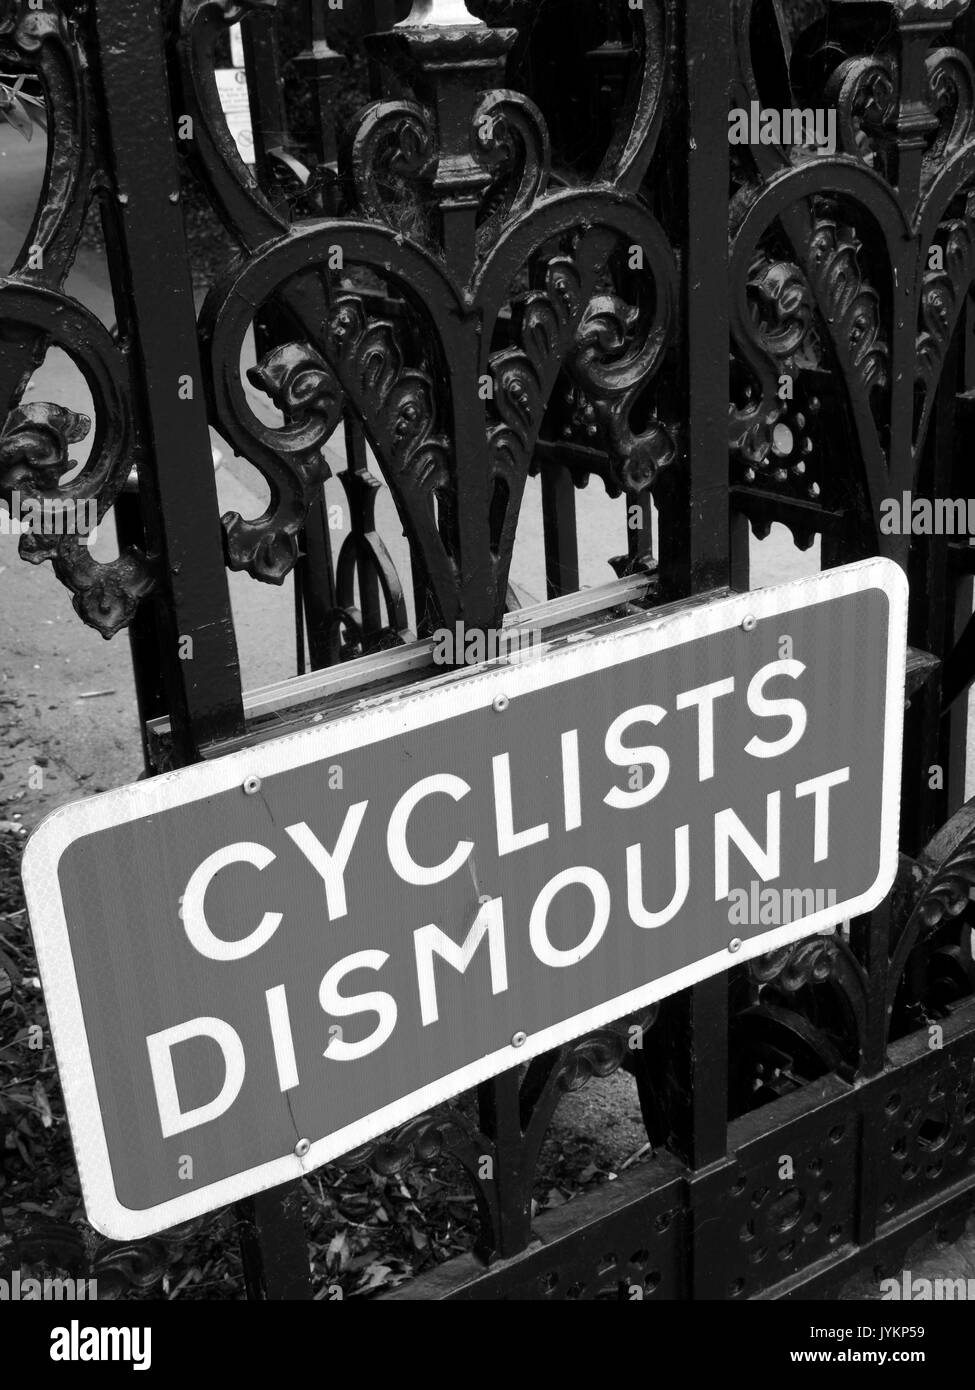 Cyclist dismount highway information sign mounted on iron railings Stock Photo